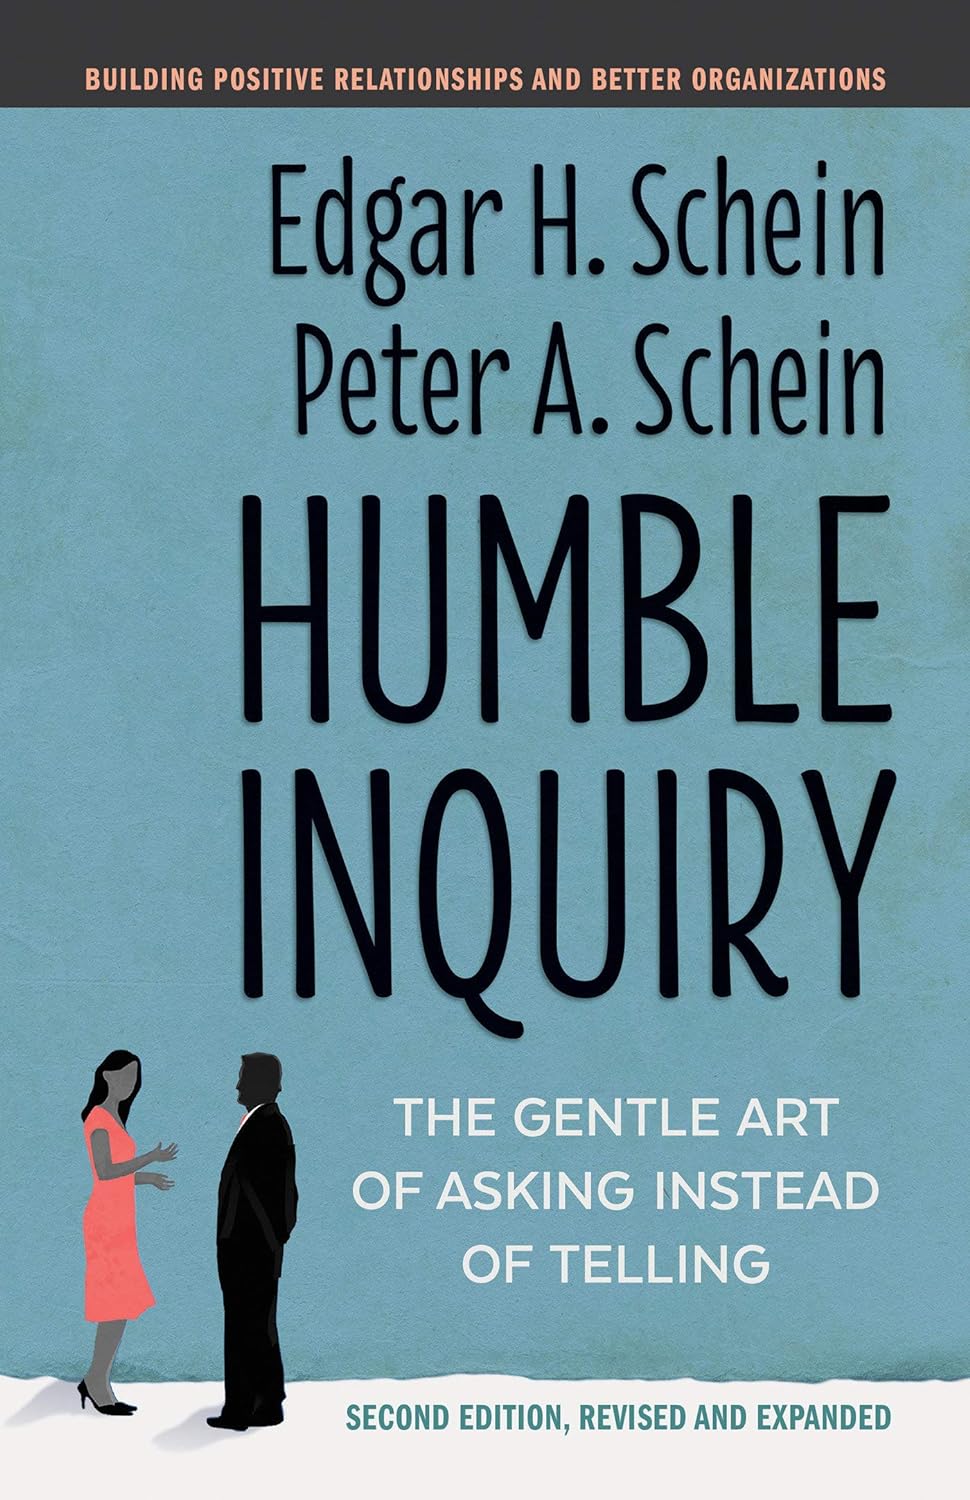 Embracing Humble Inquiry: A Personal Journey Towards Effective Collaboration